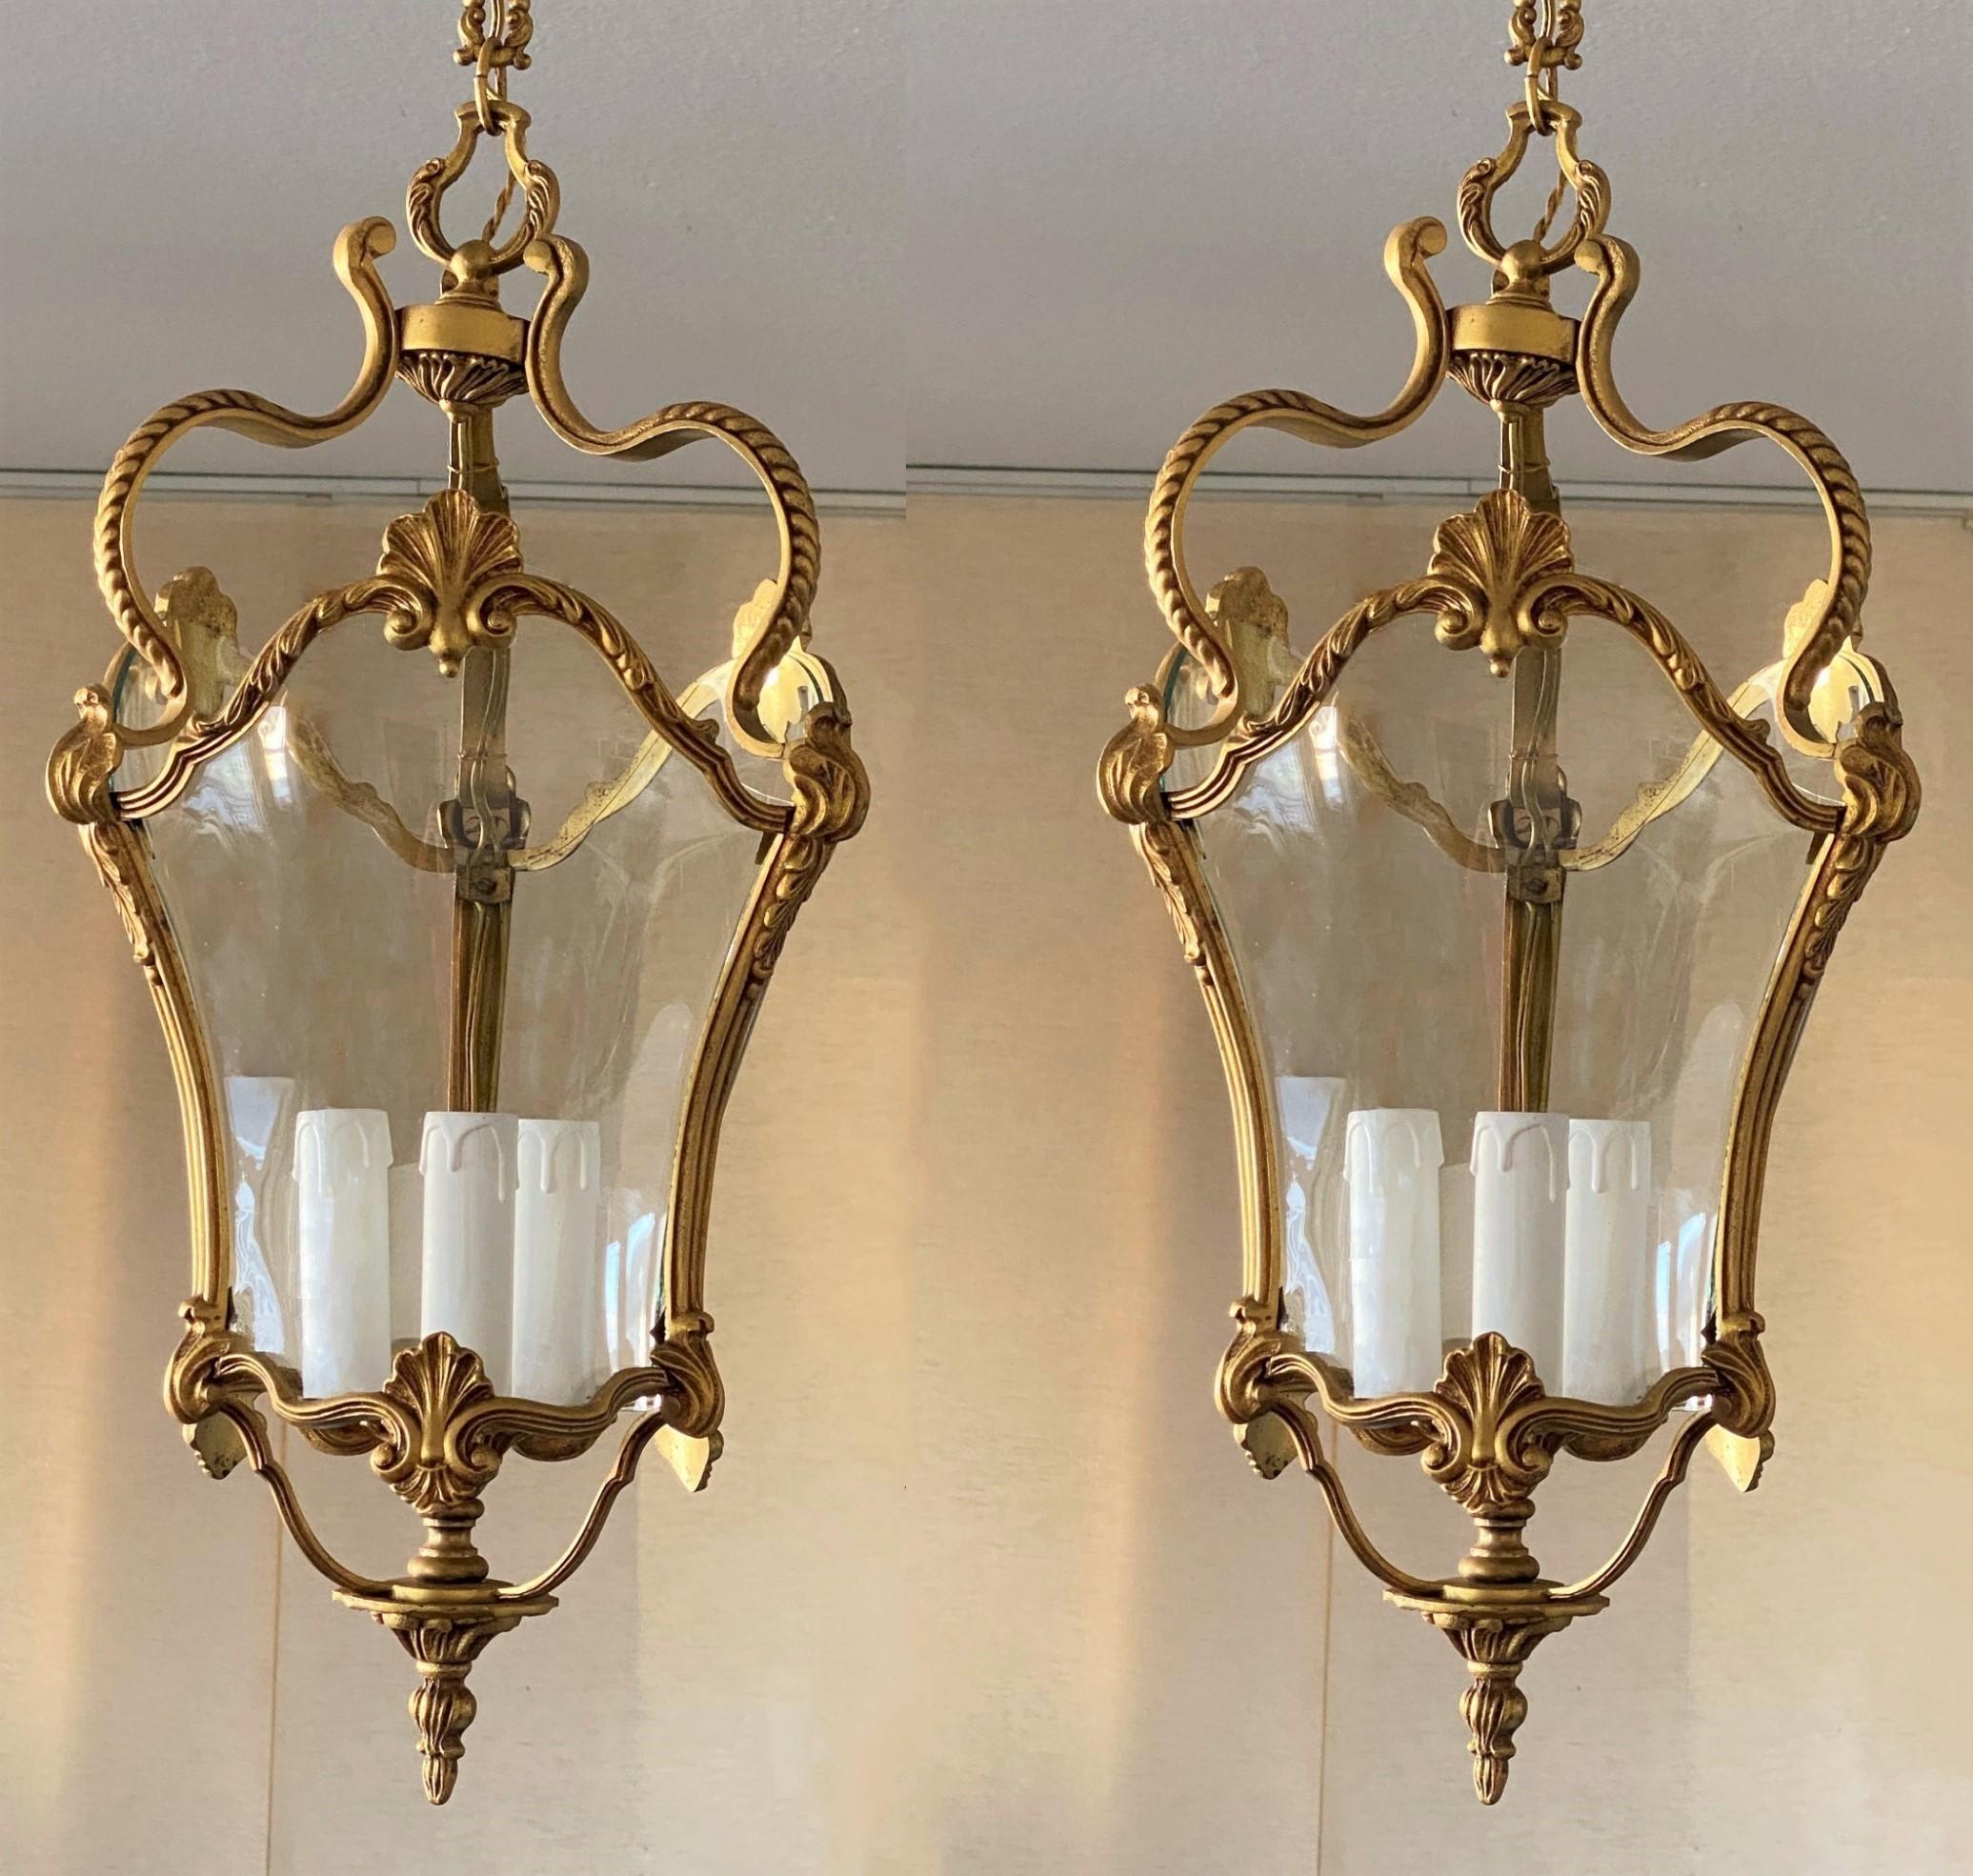 A pair of fine antique Art Deco bronze doré and crystal lanterns, France, early 20th century. Finely cast, hand-chassed and hand-chiseled French fire-gilded bronze with crystal arched crystal panels and a central three-light candelabra cluster. Due